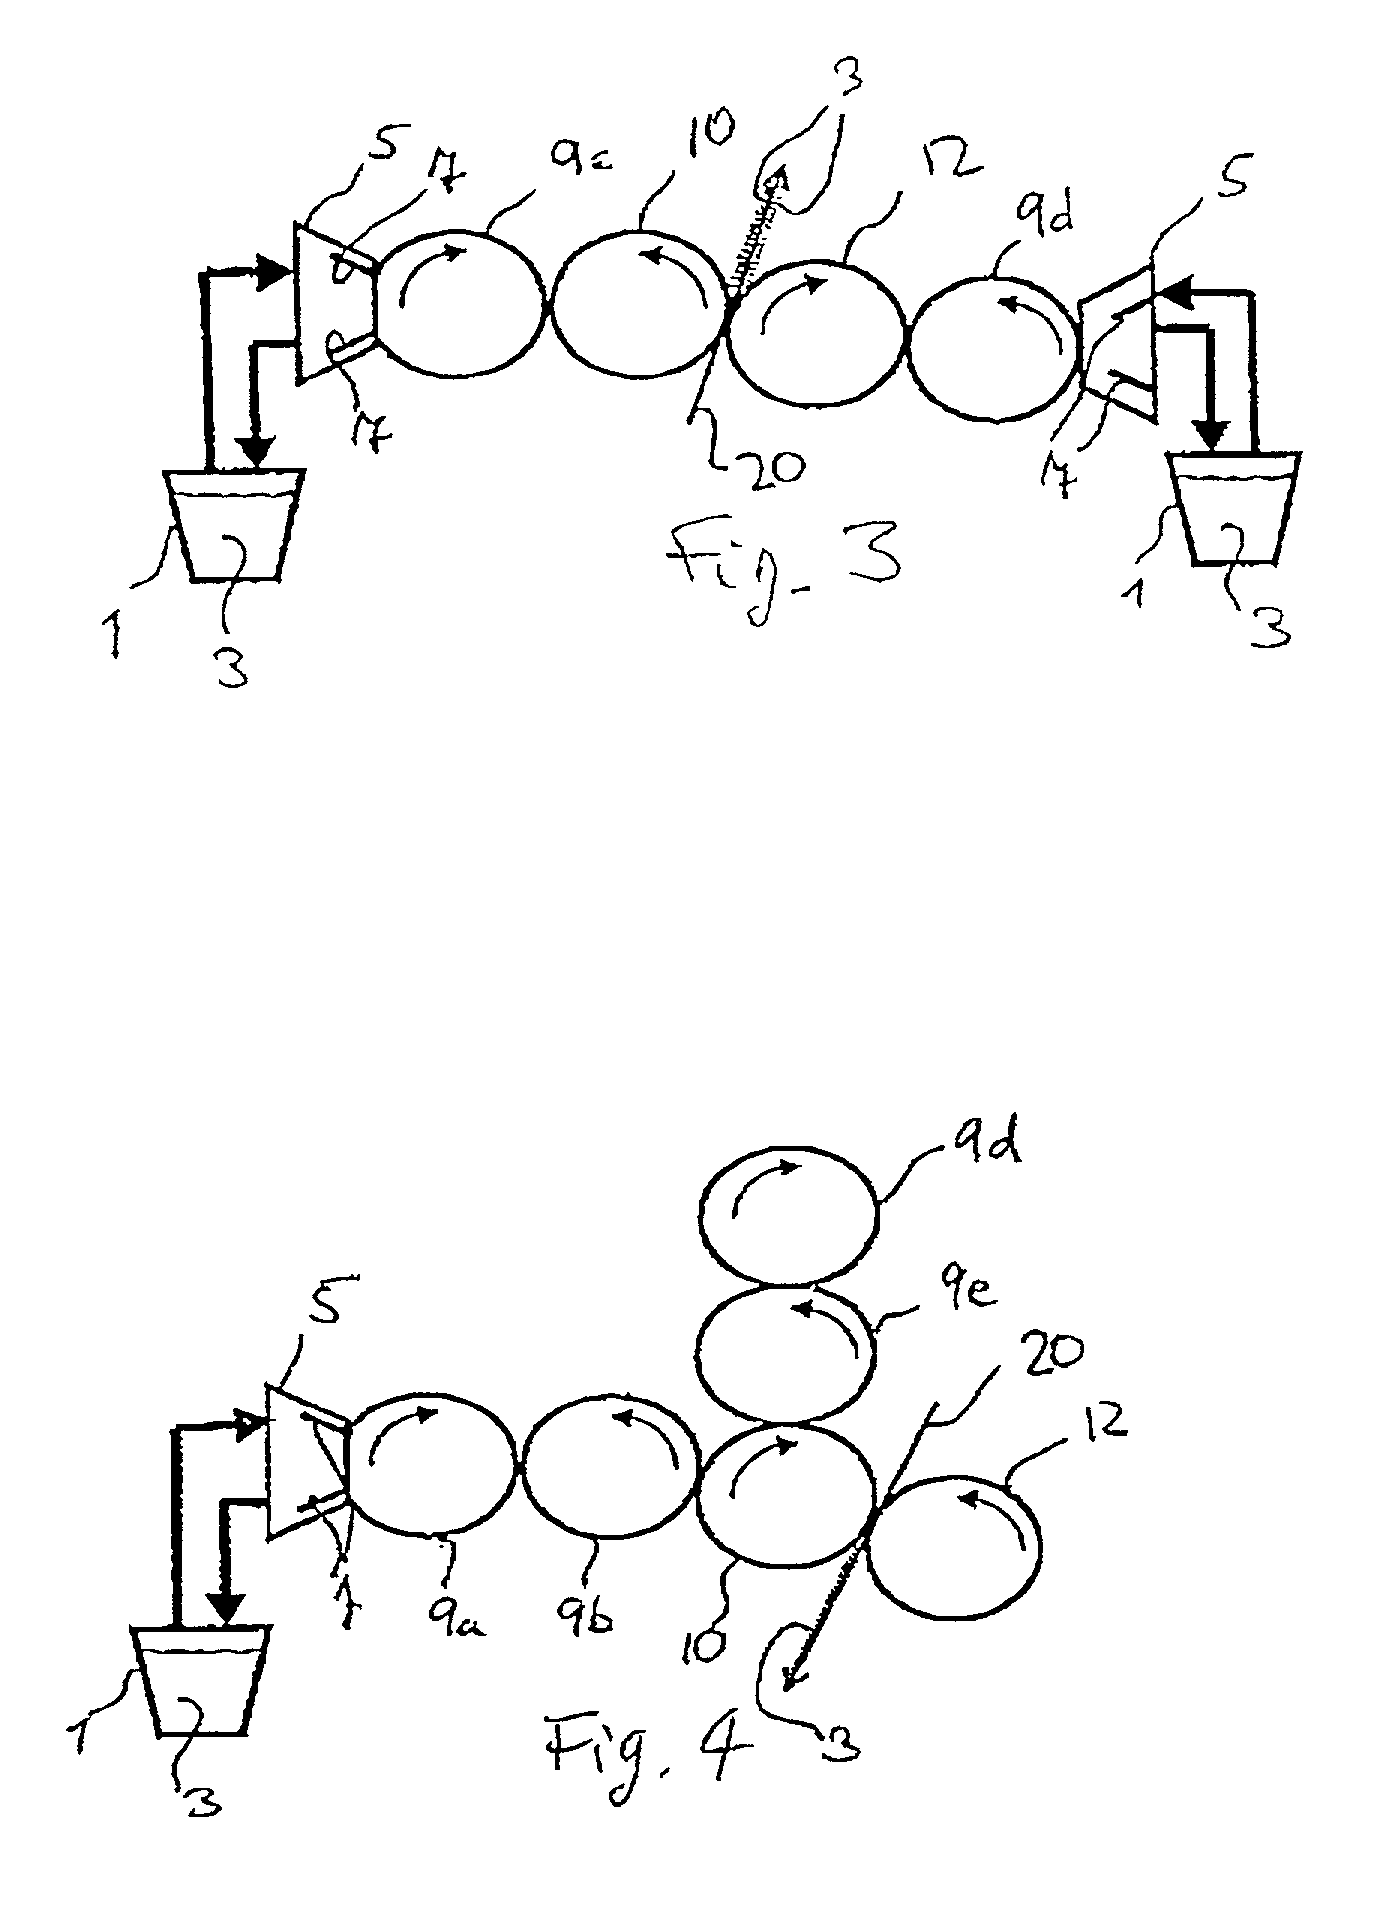 Method of and apparatus for producing a printed ink pattern on a tissue product, as well as a printed tissue product as such